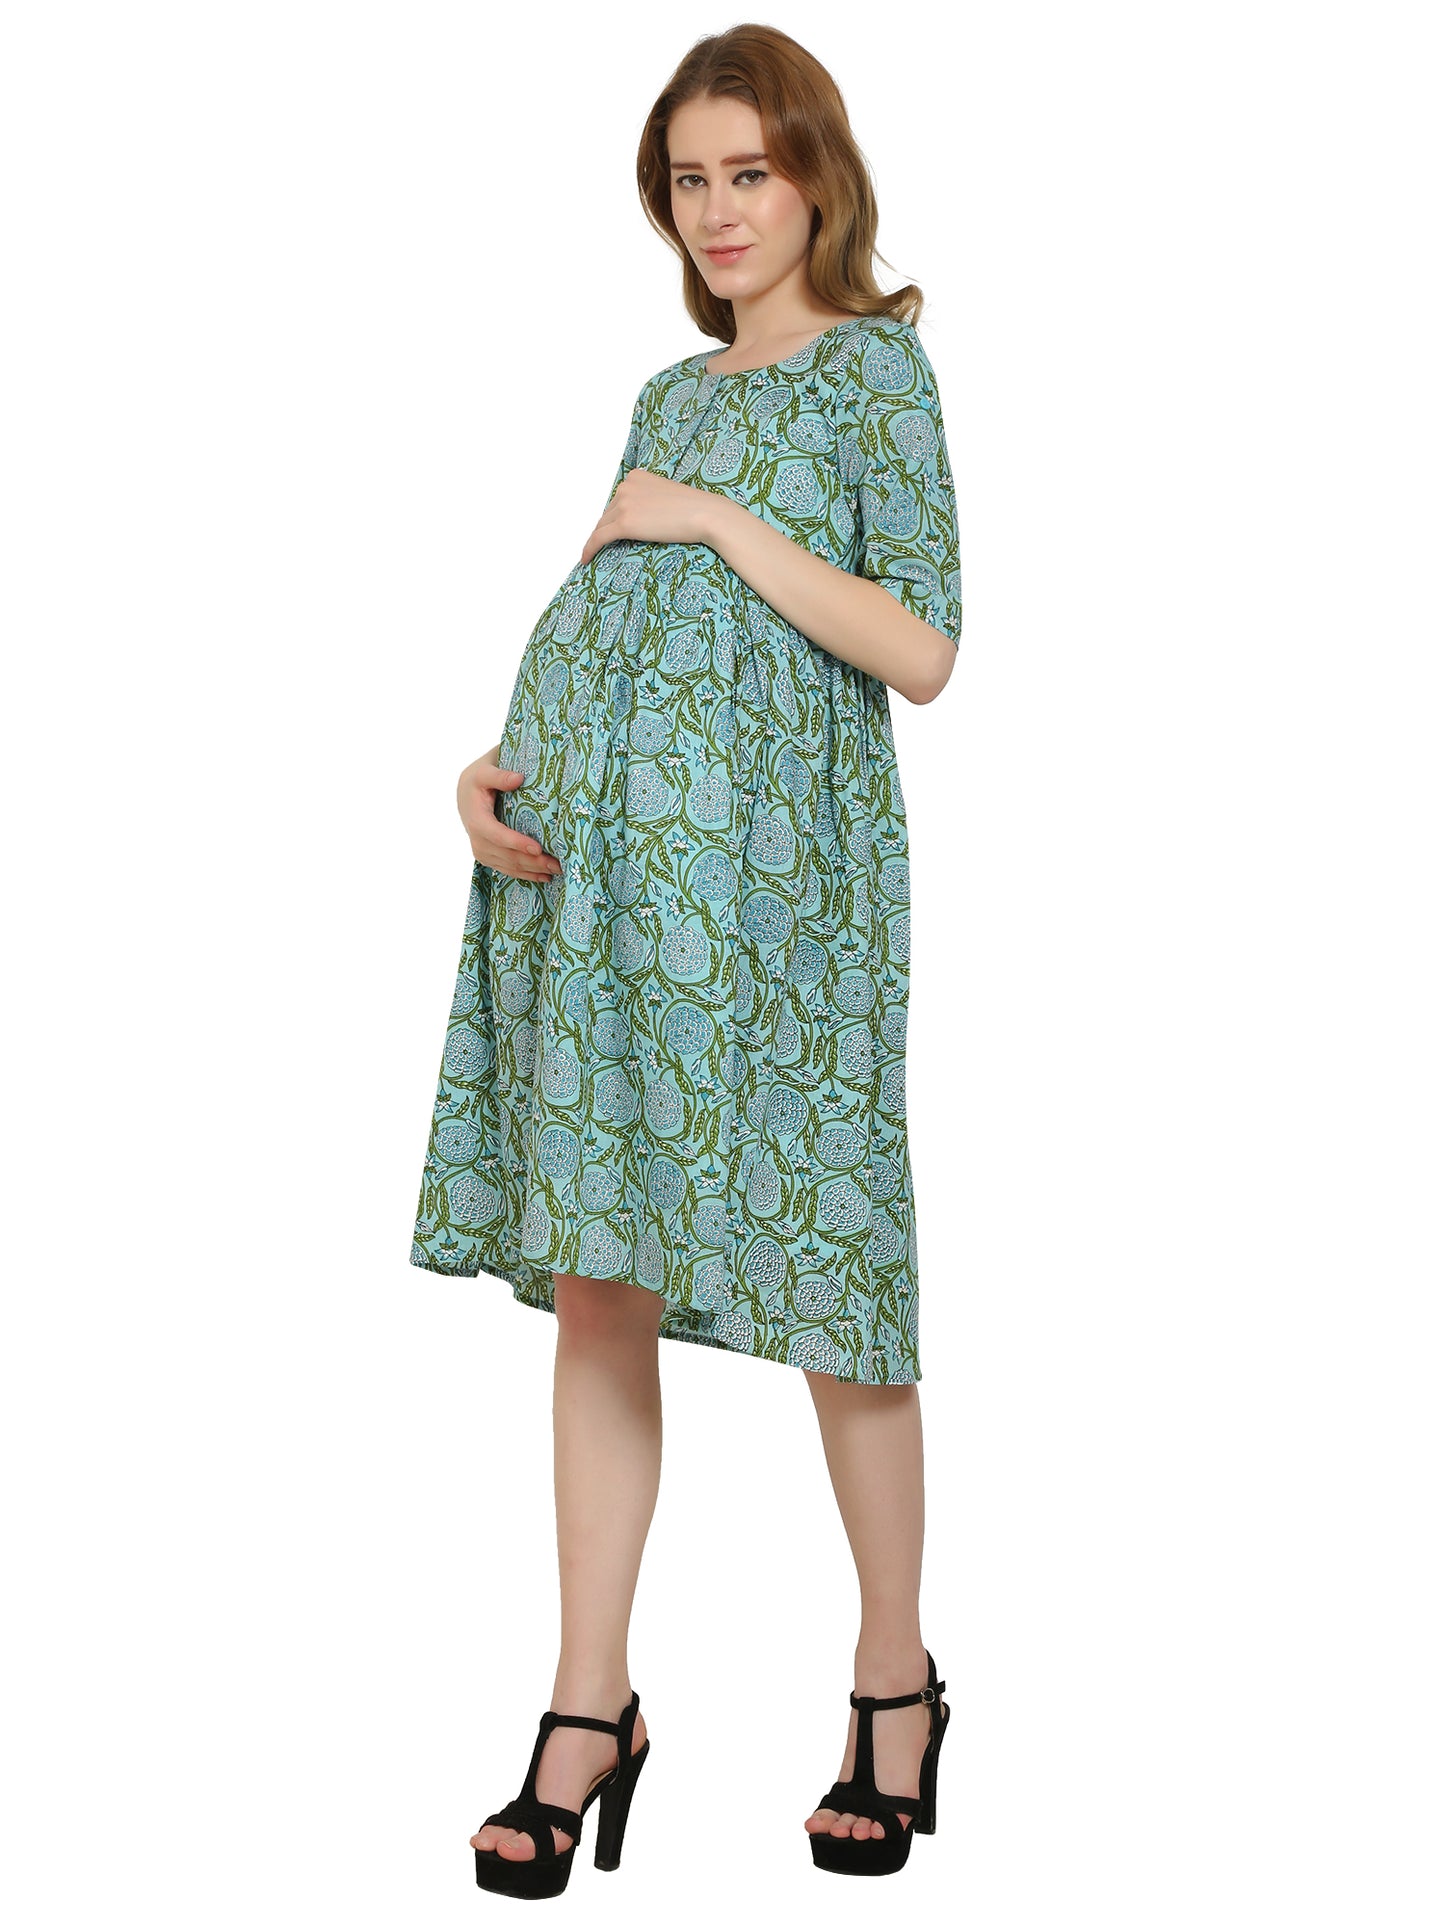 Maternity Dress | Pure Cotton | Teal Color Printed Dress | Feeding Dress | Pre and Post Pregnancy